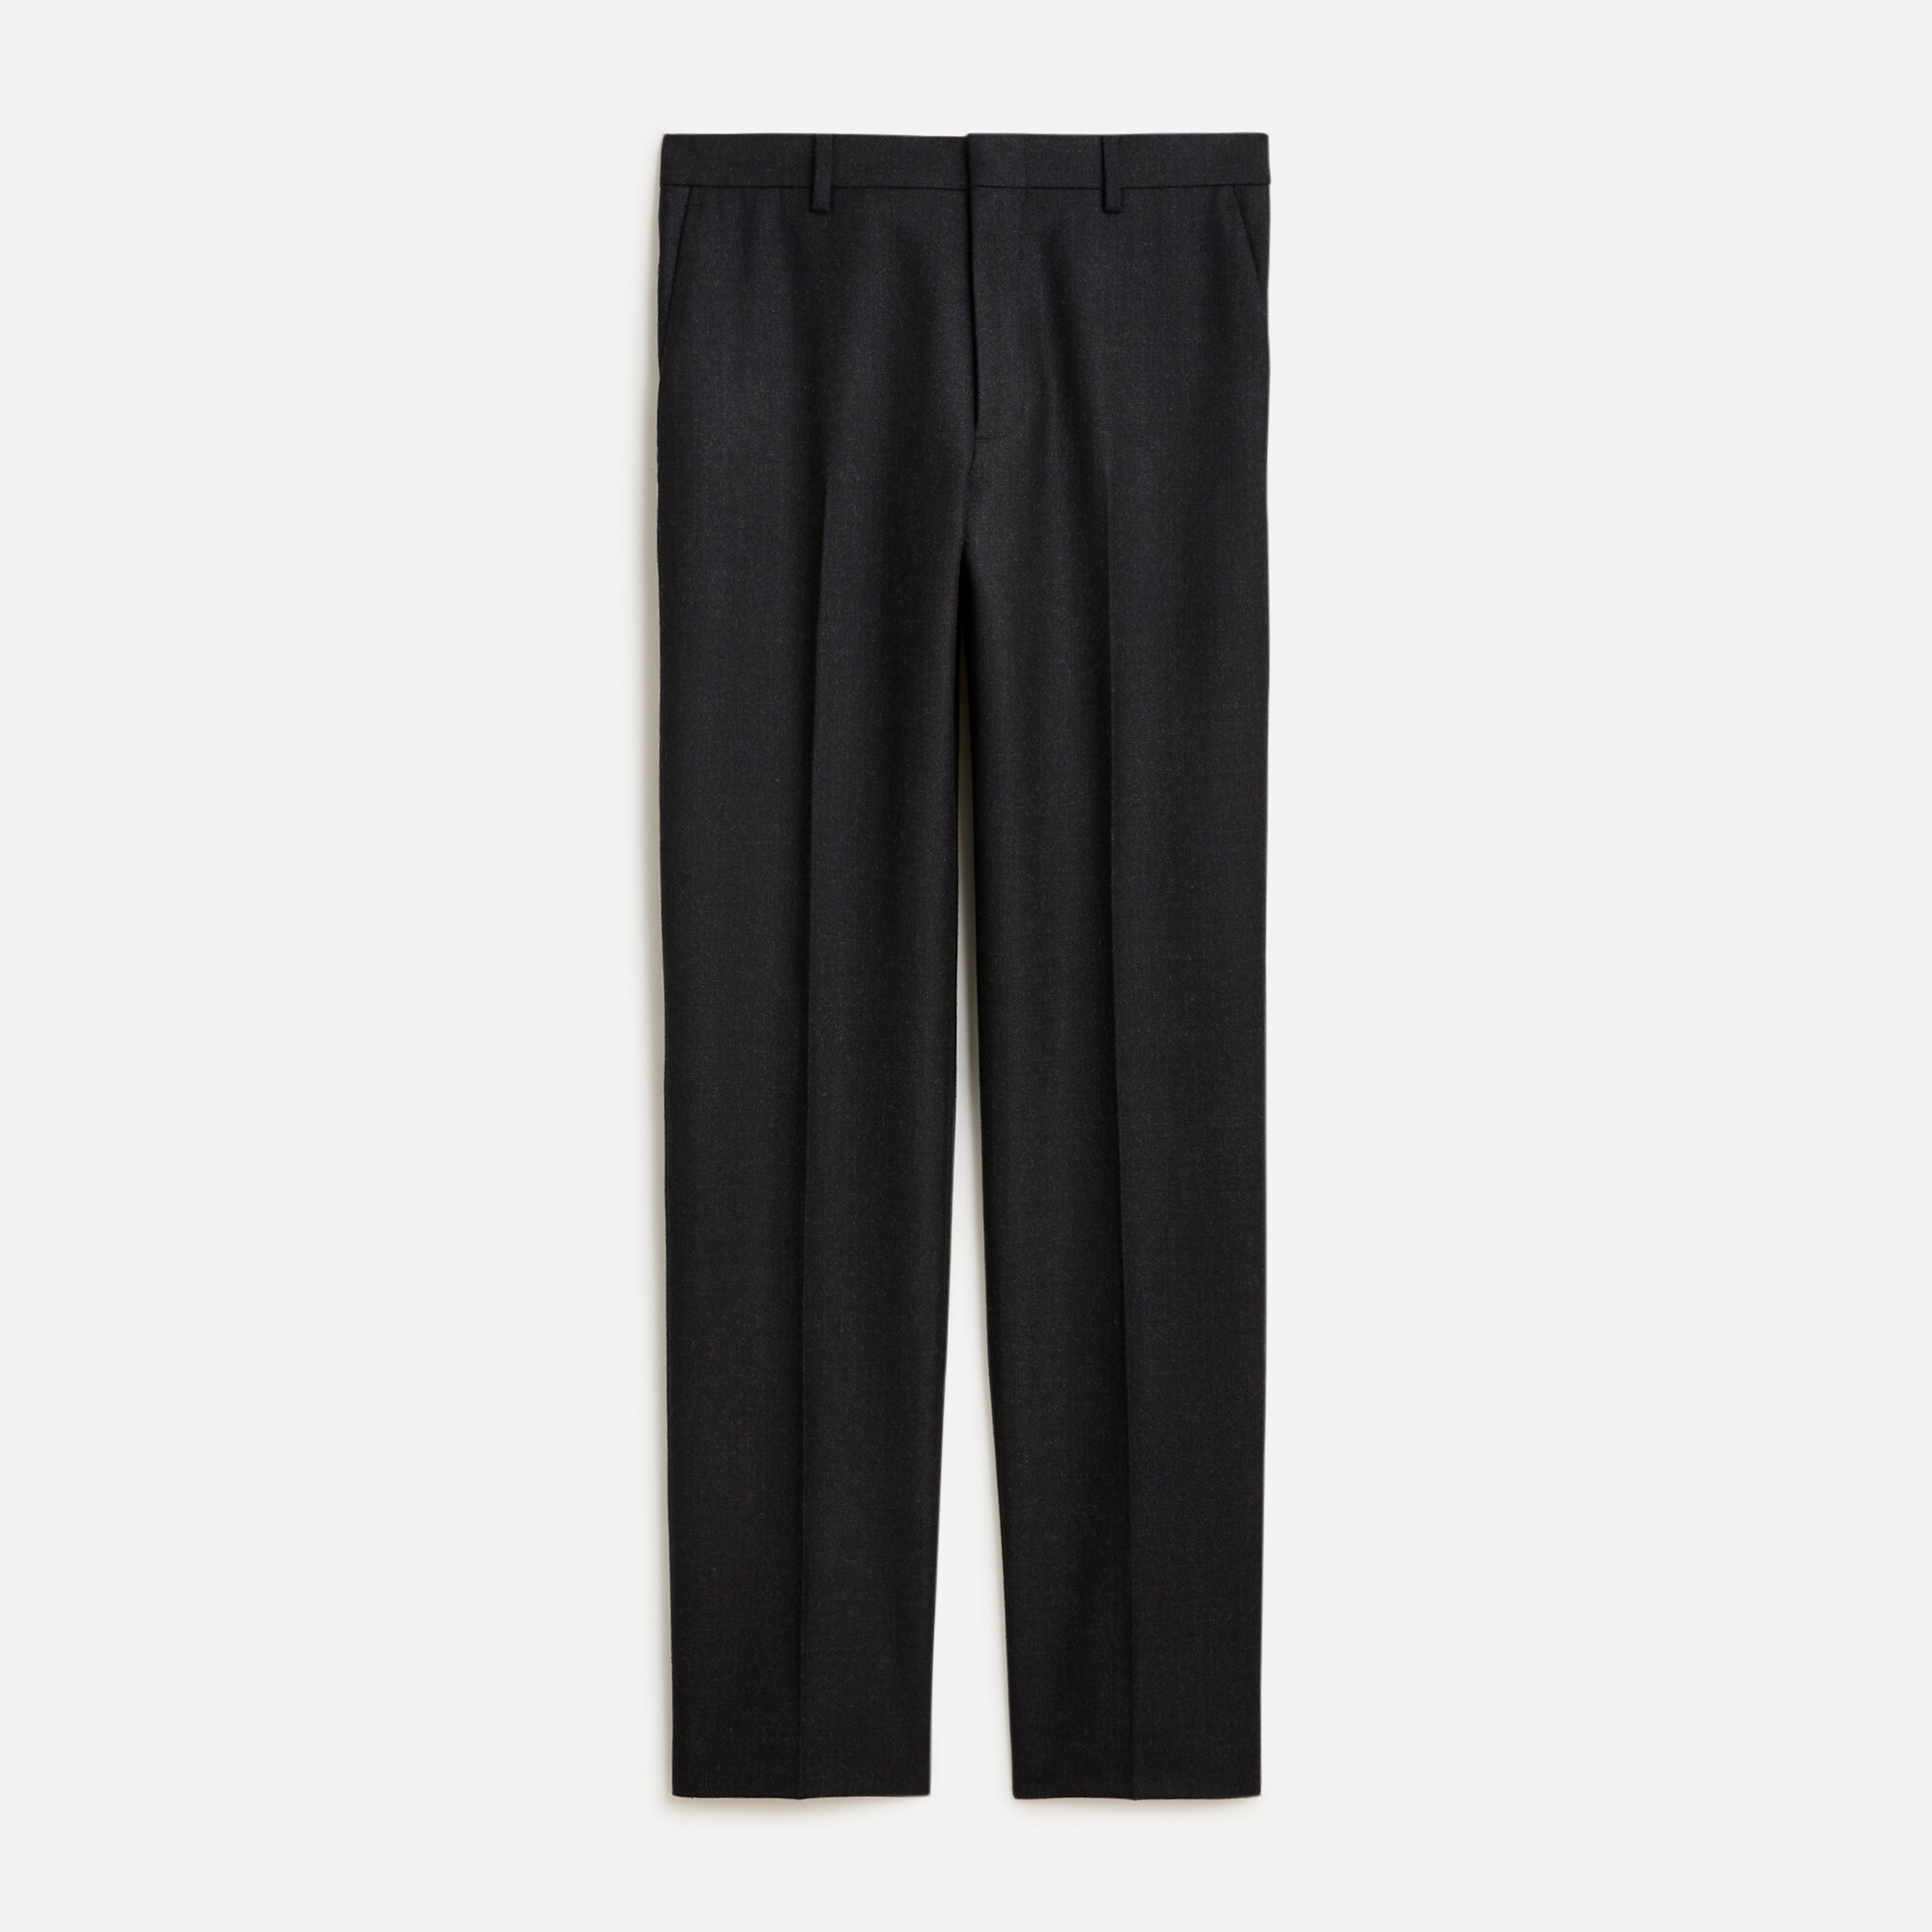 mens Ludlow Slim-fit suit pant in English cotton-wool blend